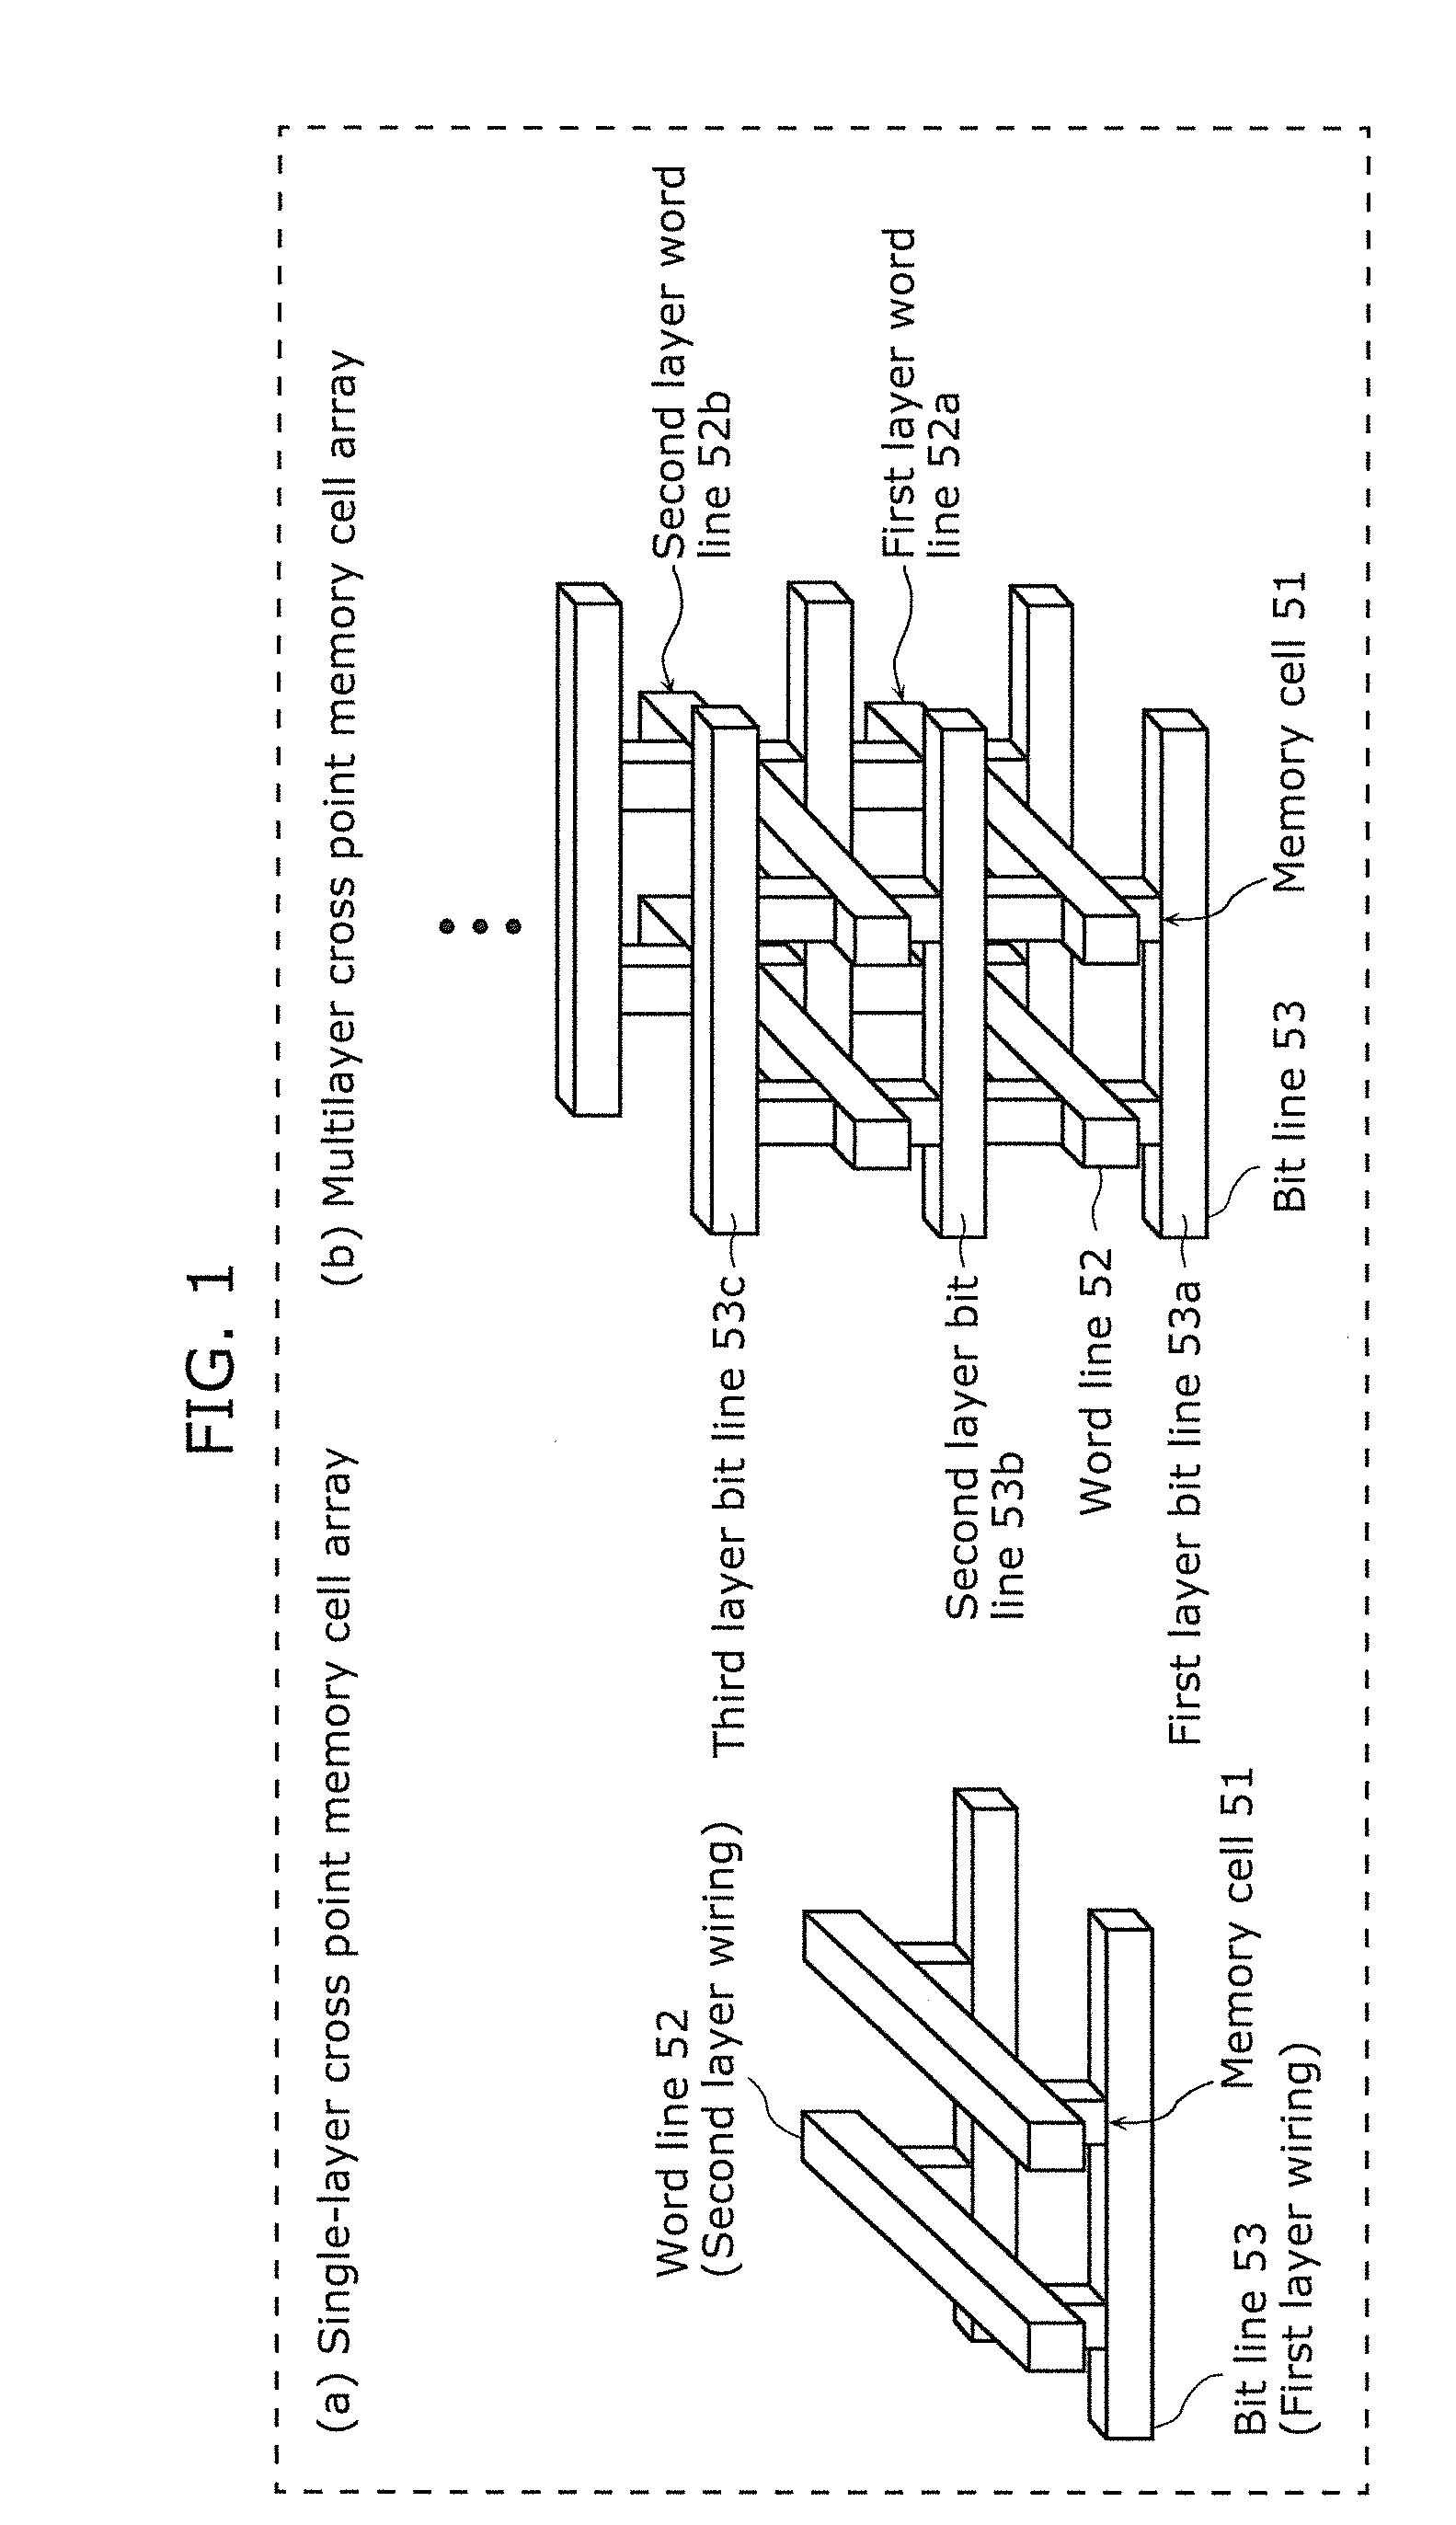 Cross point variable resistance nonvolatile memory device